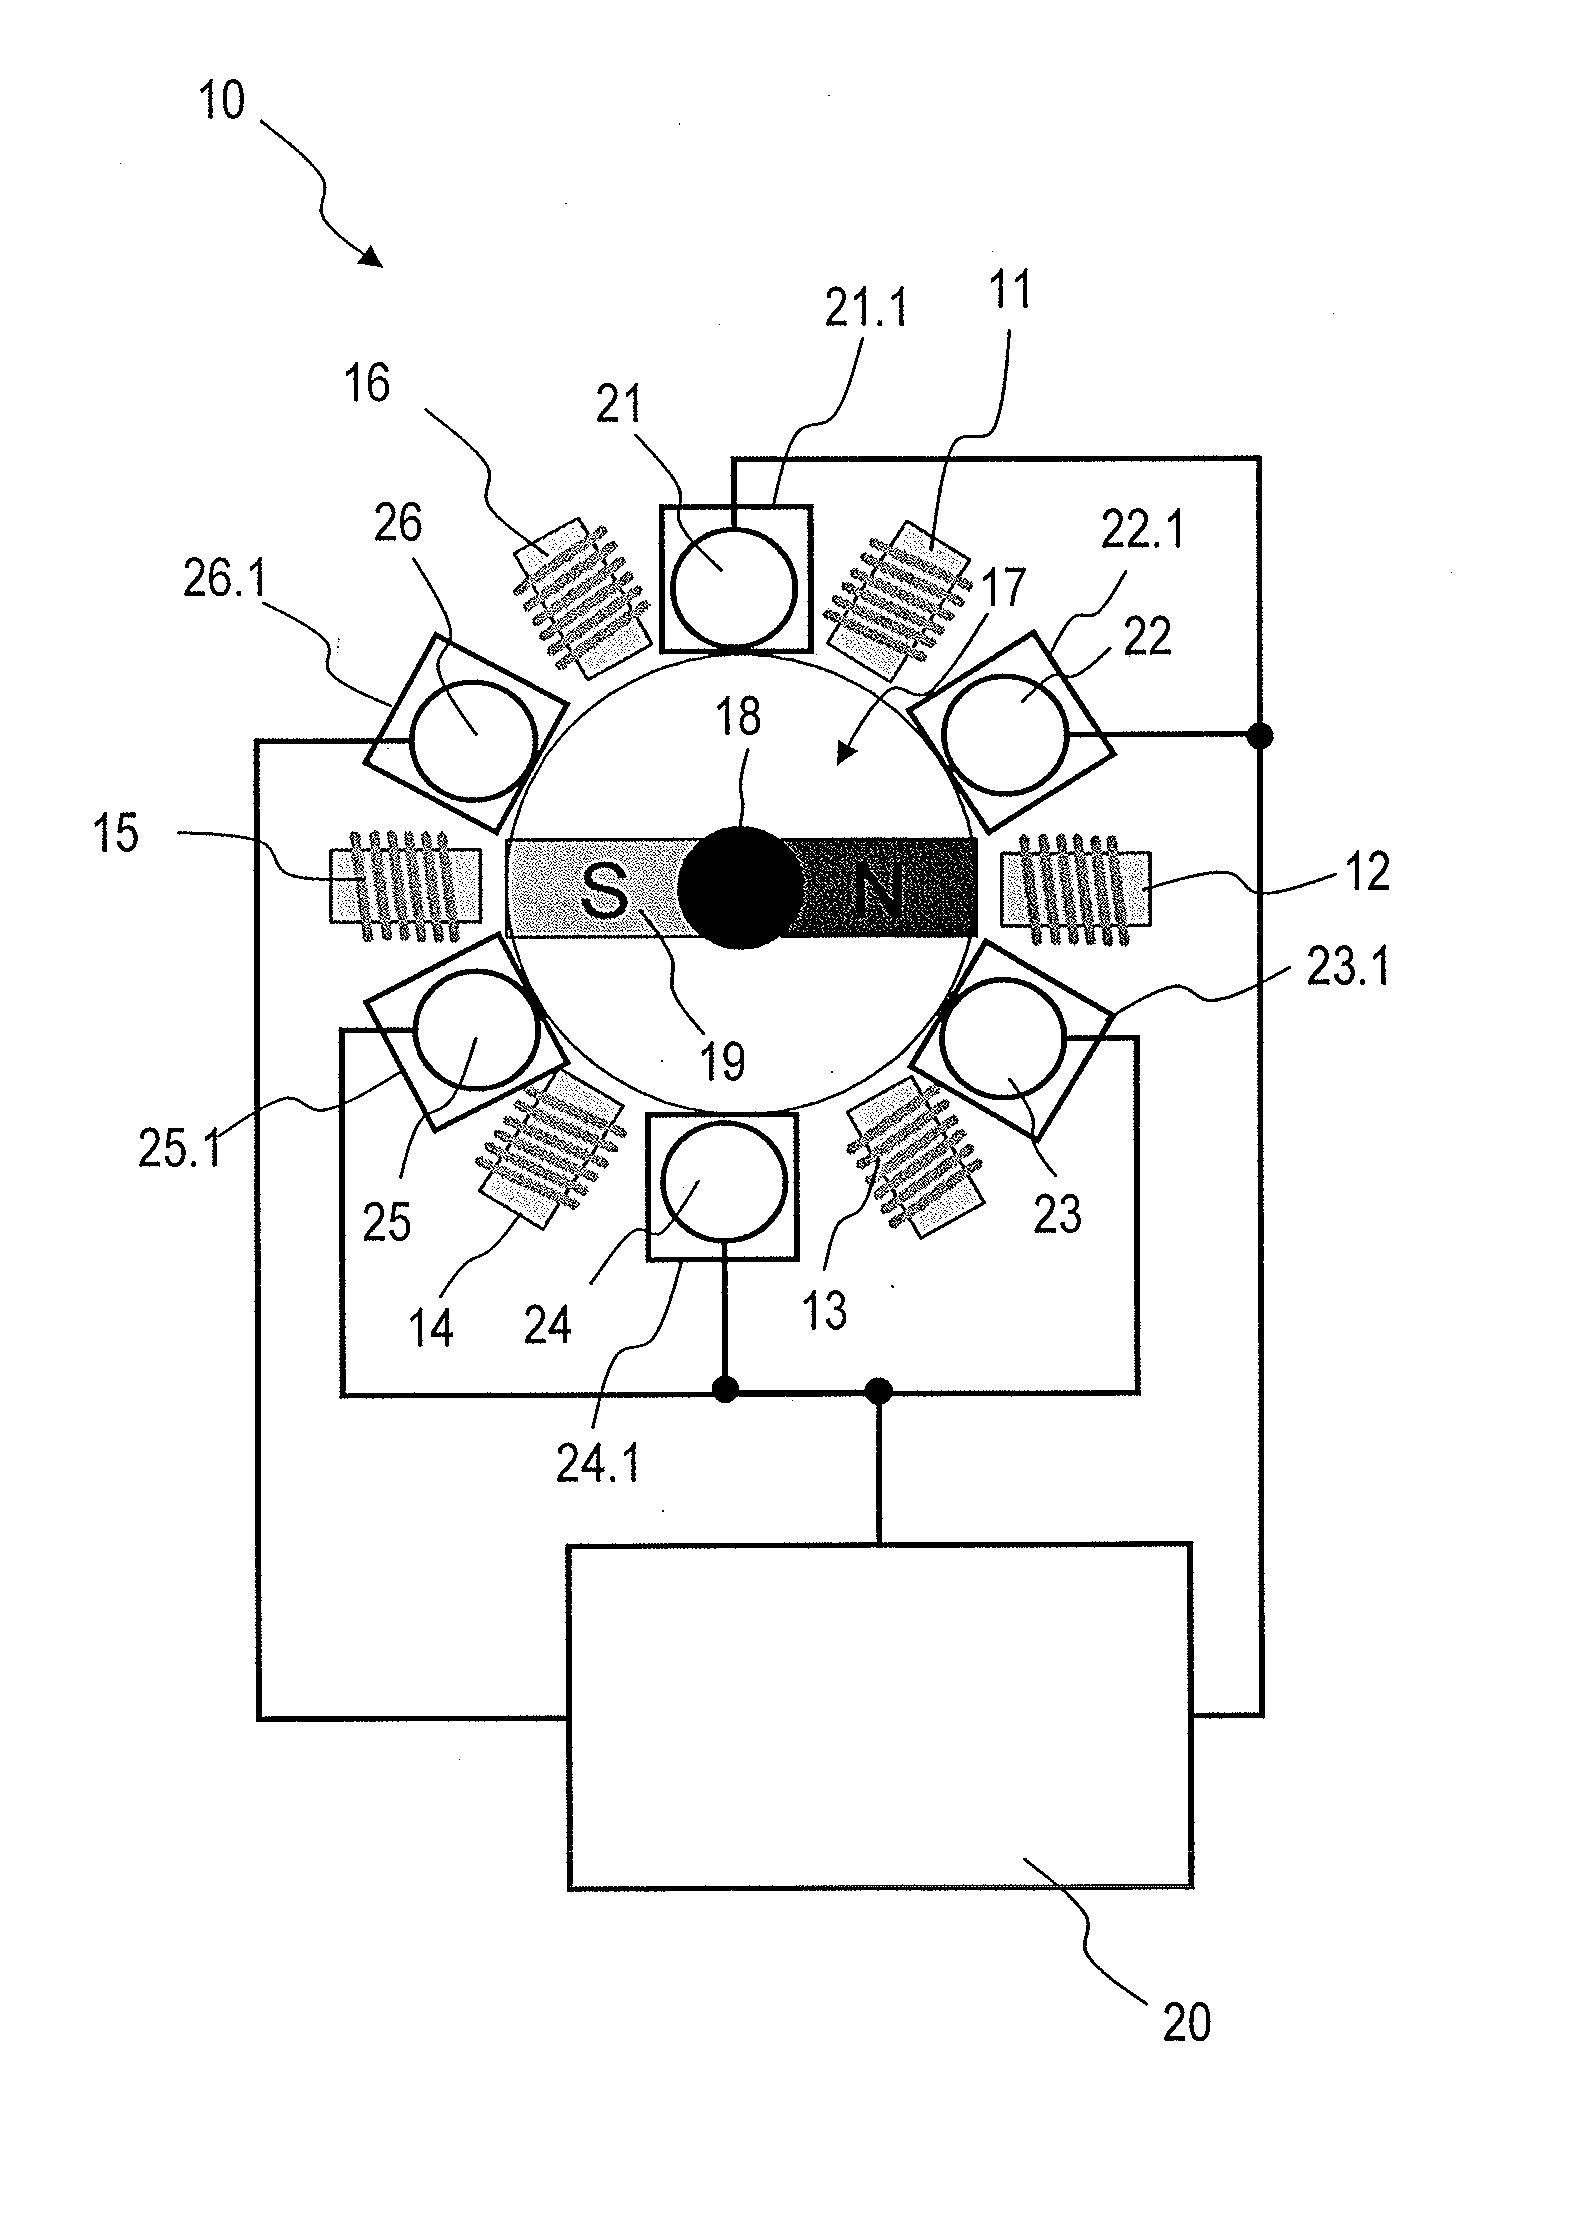 Drive Authorization System for an Electric Drive